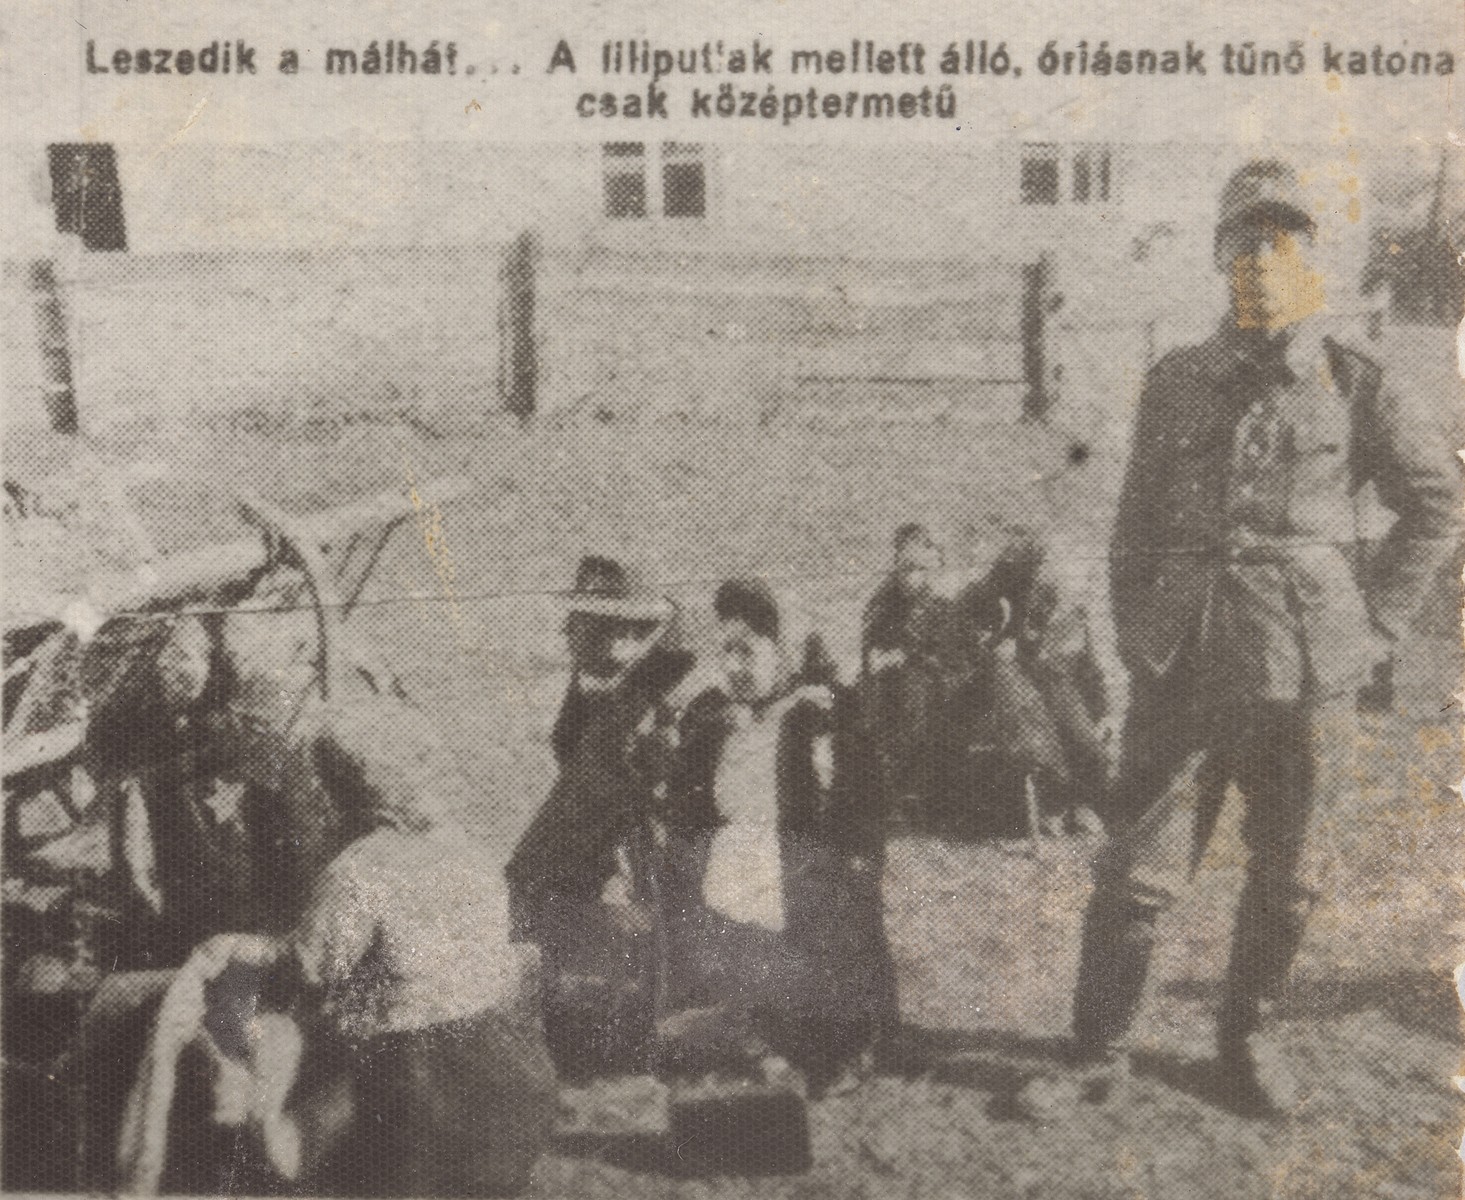 A German soldier stands next to a group of Jewish dwarves as they remove their bundles from a farm wagon.

The dwarves are members of the Ovici family.  The newspaper caption reads: "They take their bundles from the cart... the soldier standing next to them appears to be a giant, even though he is only of average height."